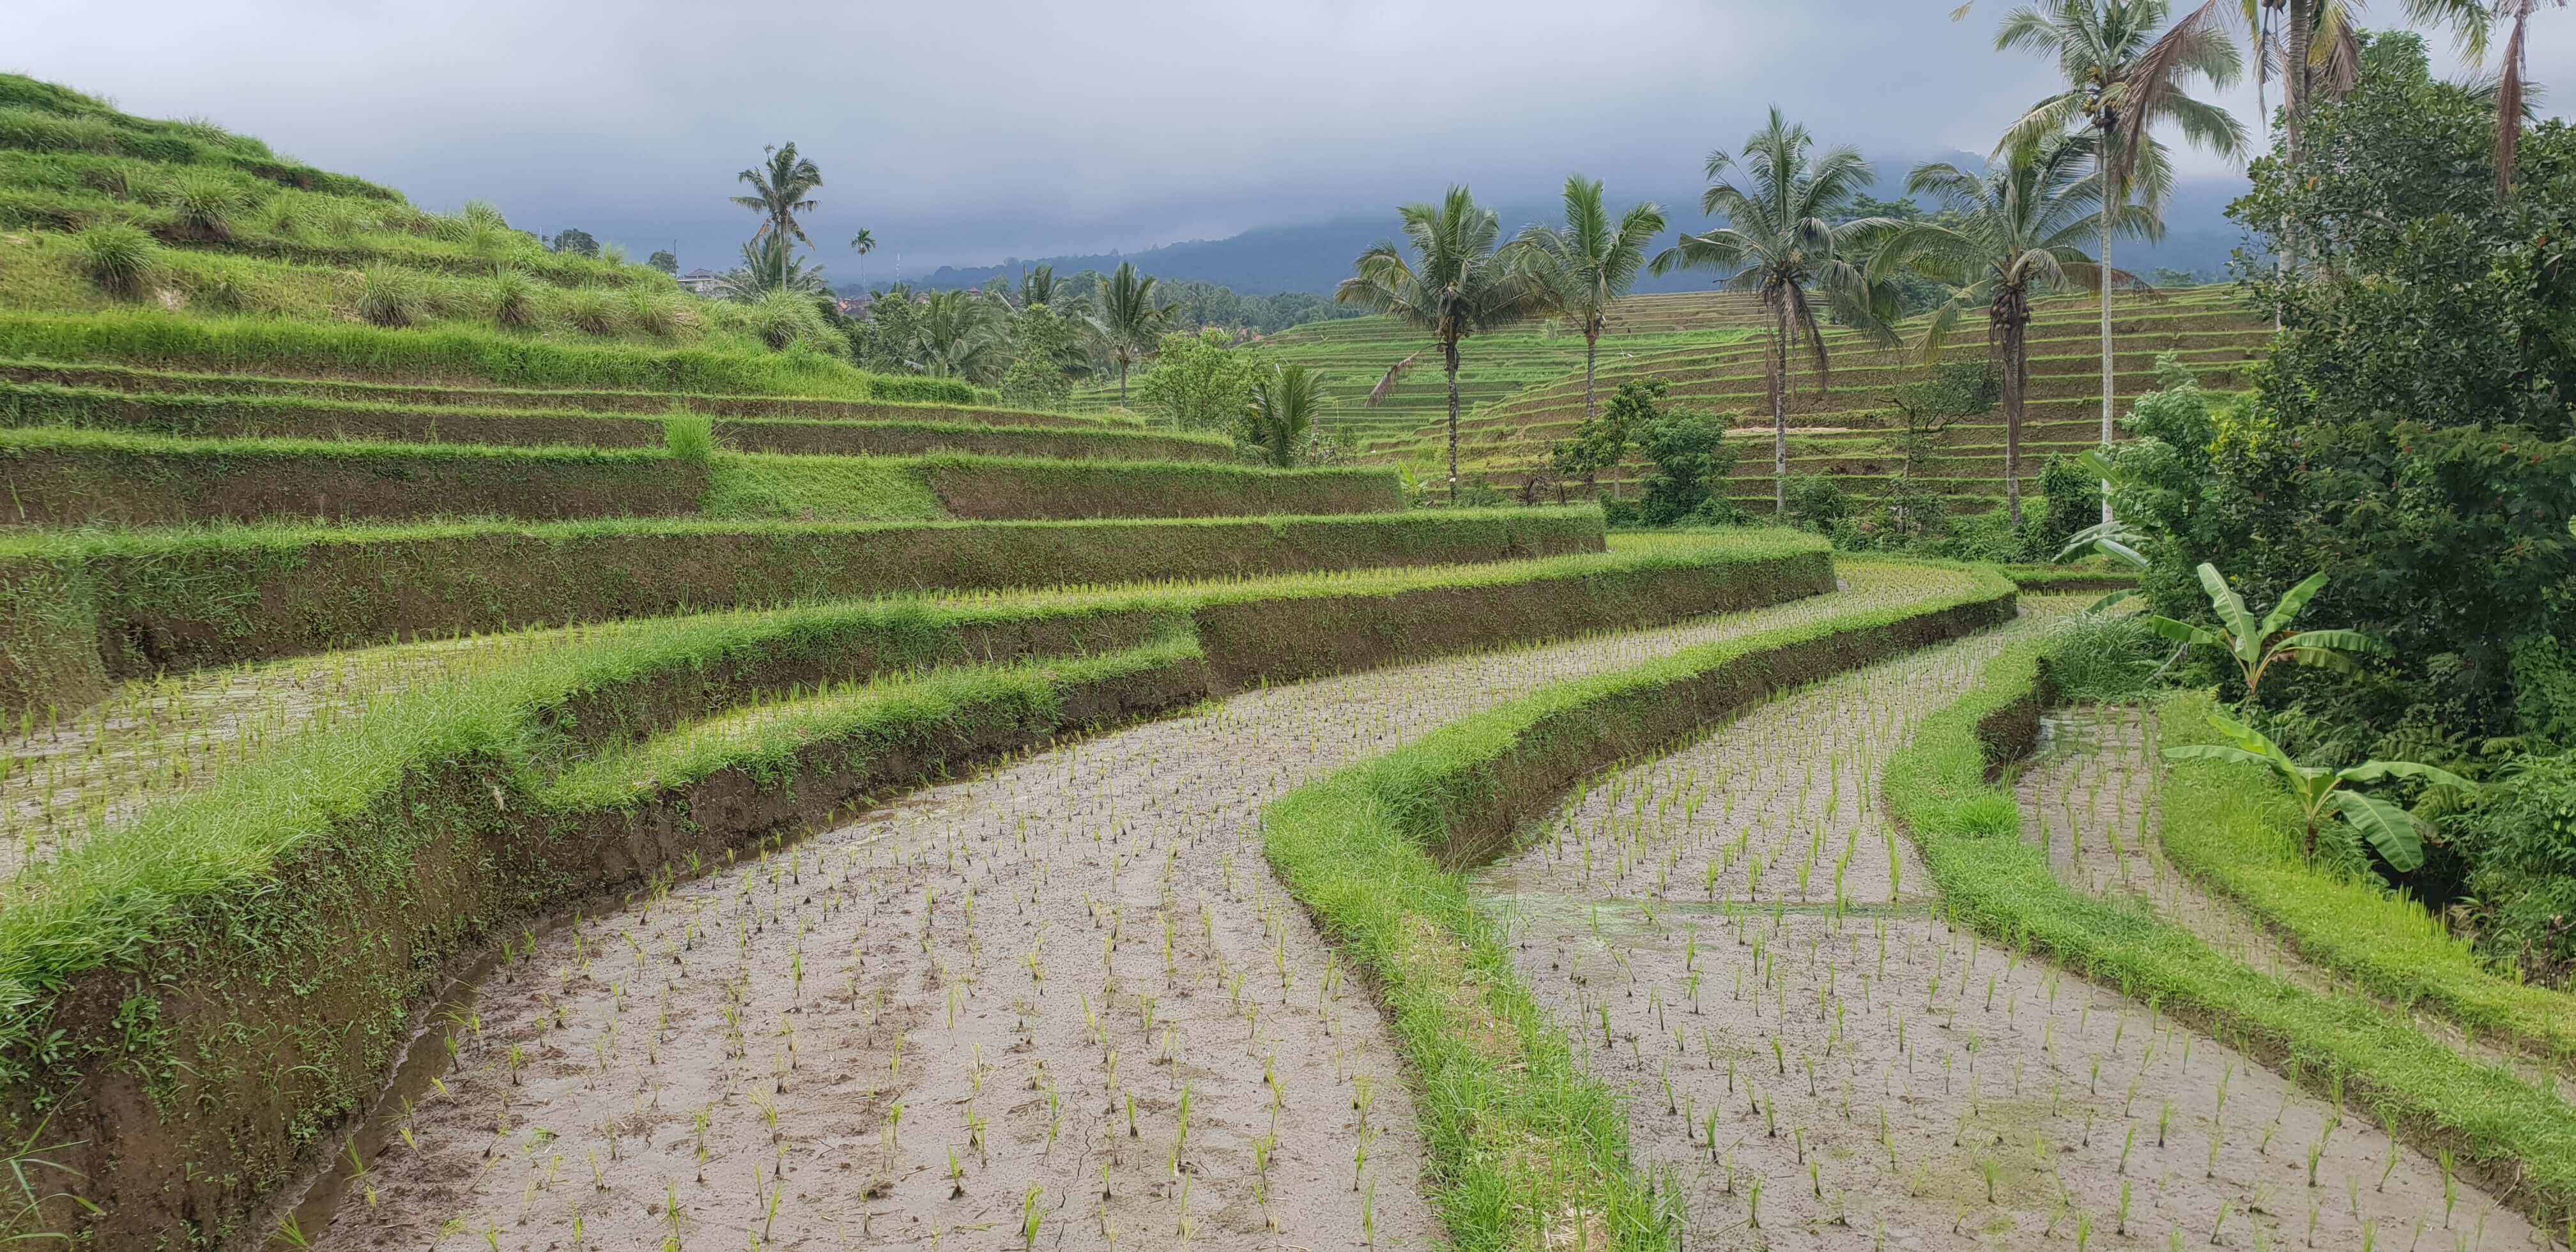 Walking through the rice paddies is a relaxing and rejuvenating feeling